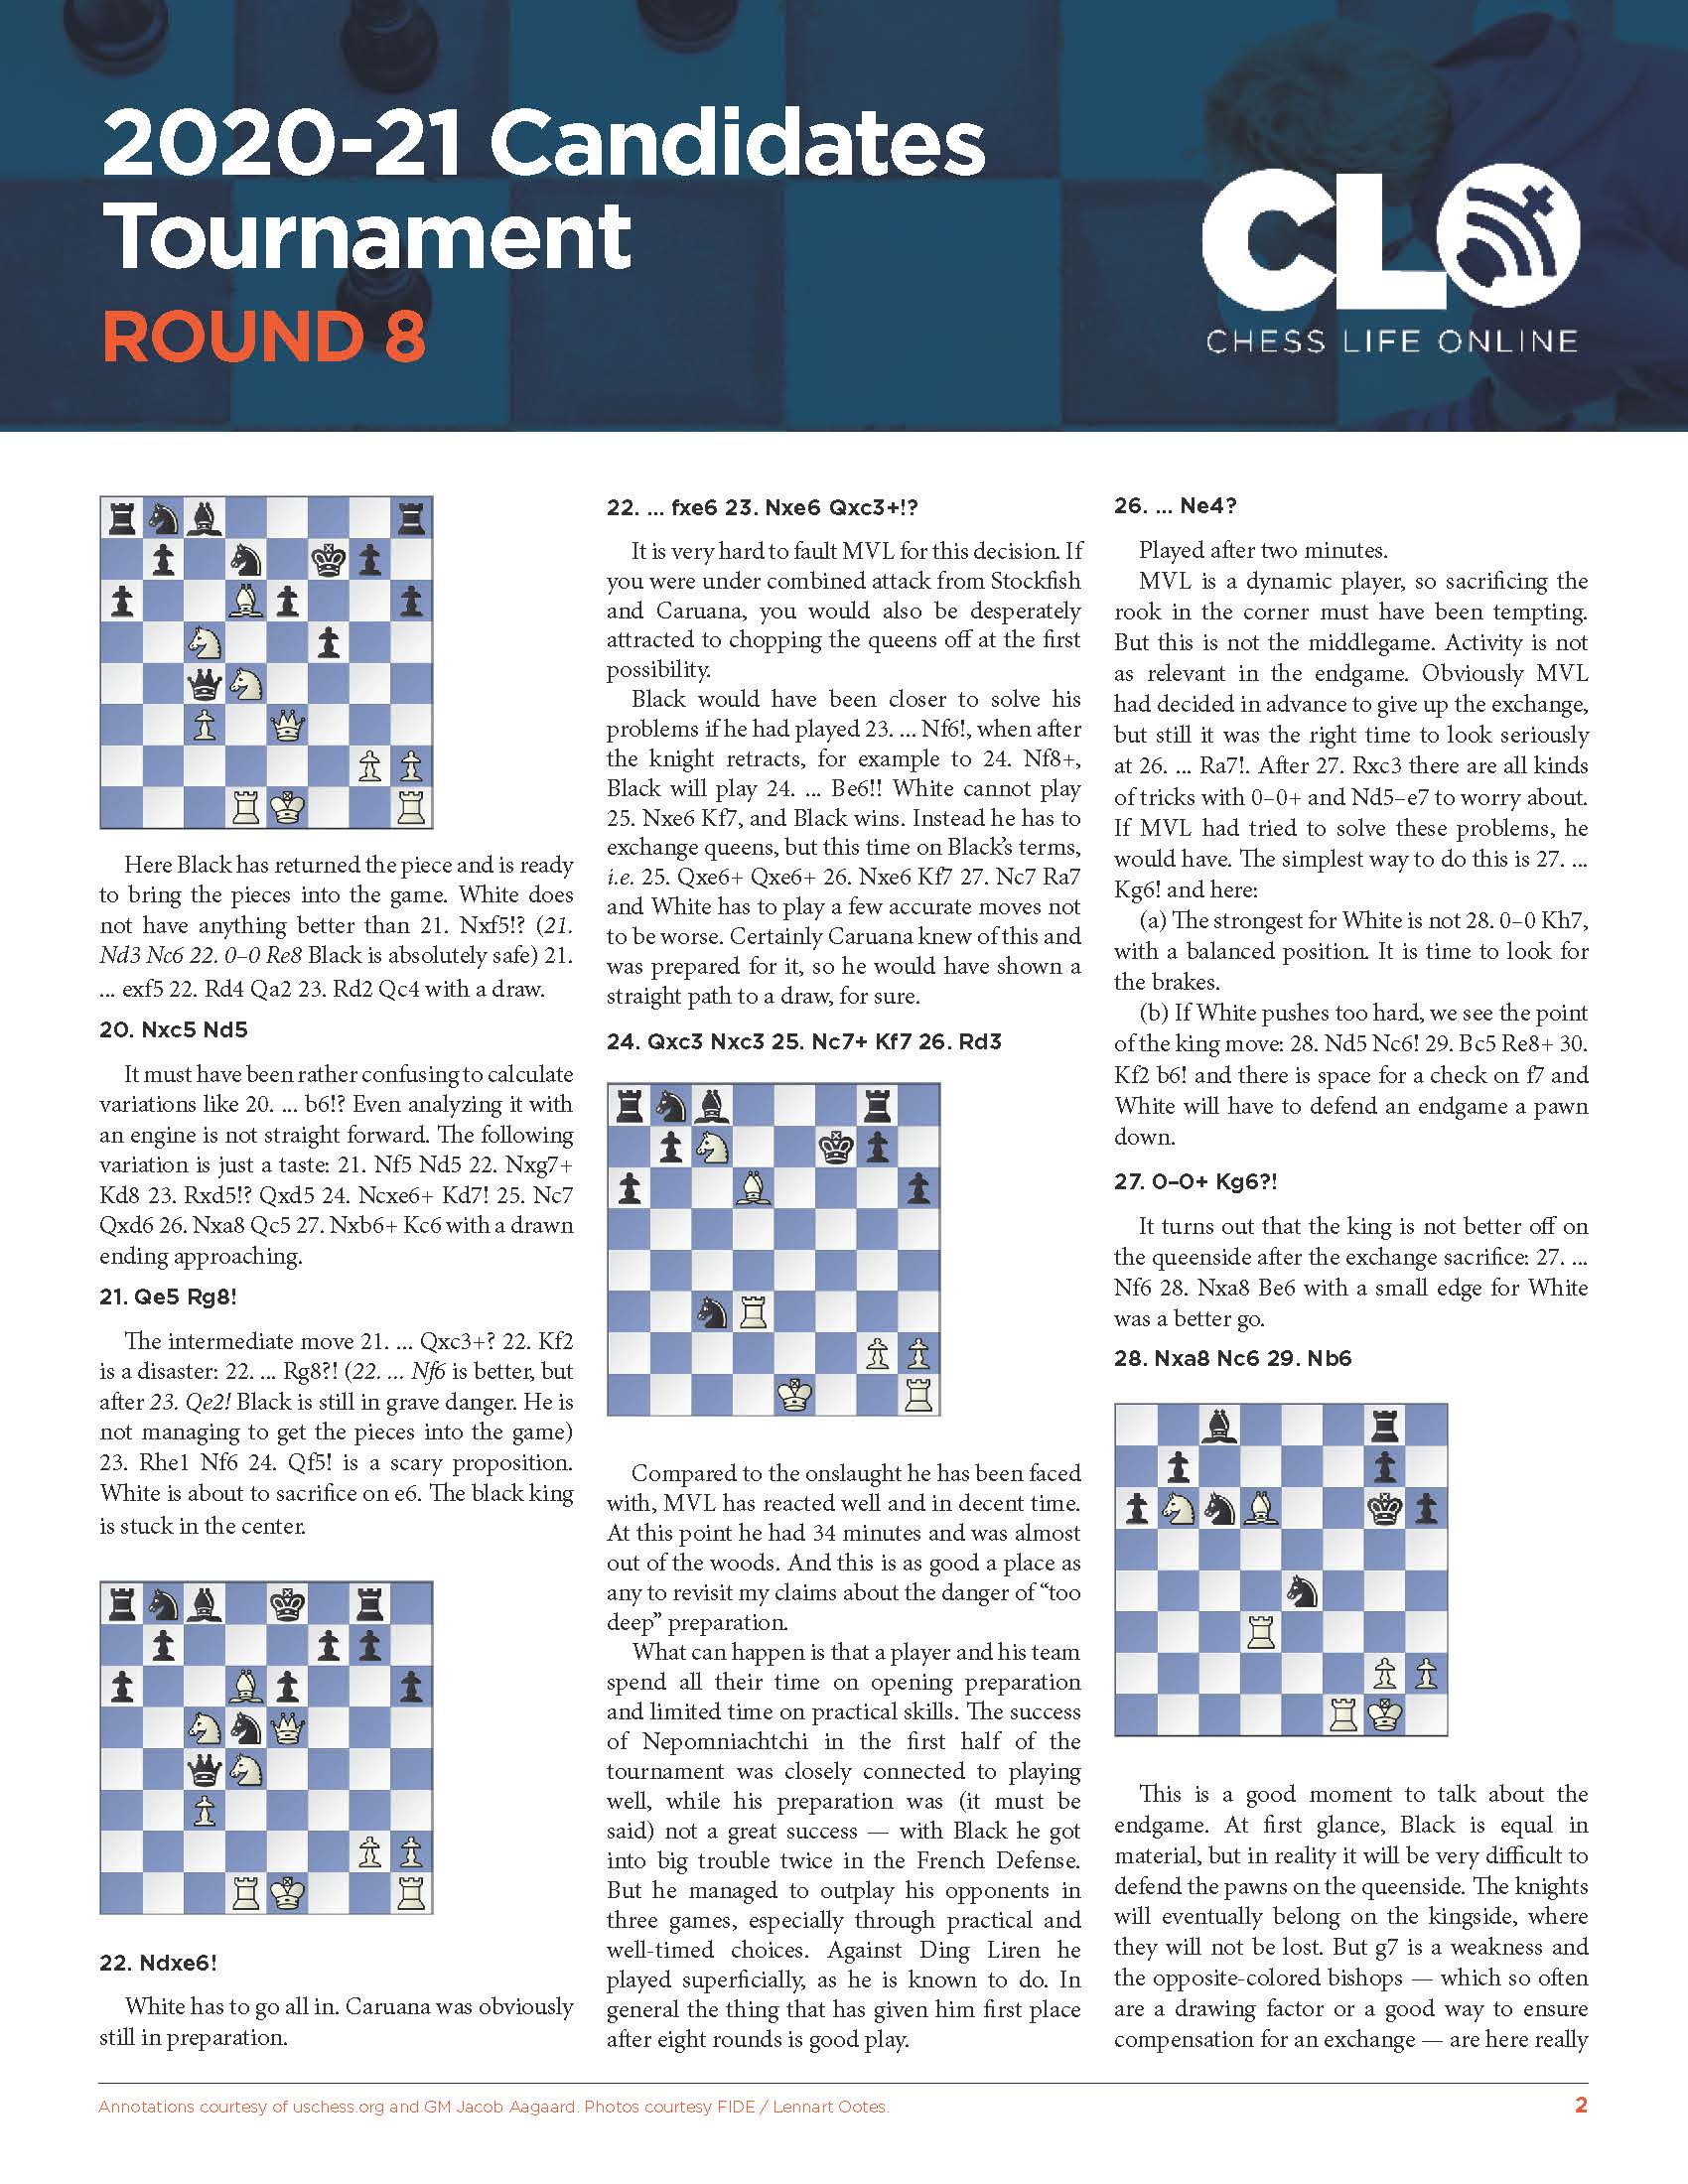 FIDE Candidates: Round 8 Annotations by GM Jacob Aagaard